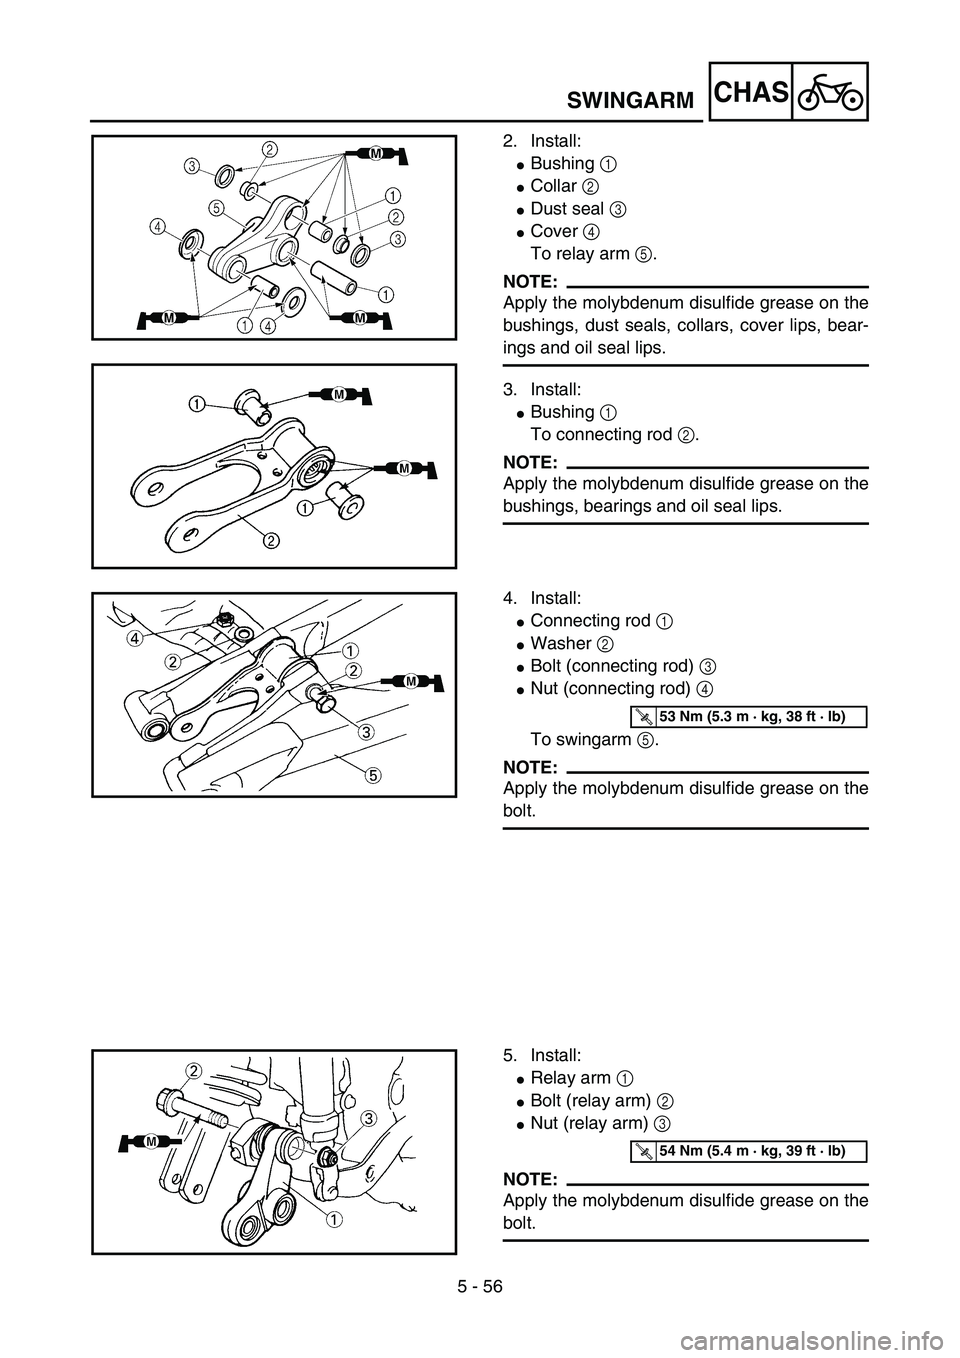 YAMAHA YZ85 2006  Owners Manual 5 - 56
CHAS
2. Install:
Bushing 1 
Collar 2 
Dust seal 3 
Cover 4 
To relay arm 5.
NOTE:
Apply the molybdenum disulfide grease on the
bushings, dust seals, collars, cover lips, bear-
ings and oil 